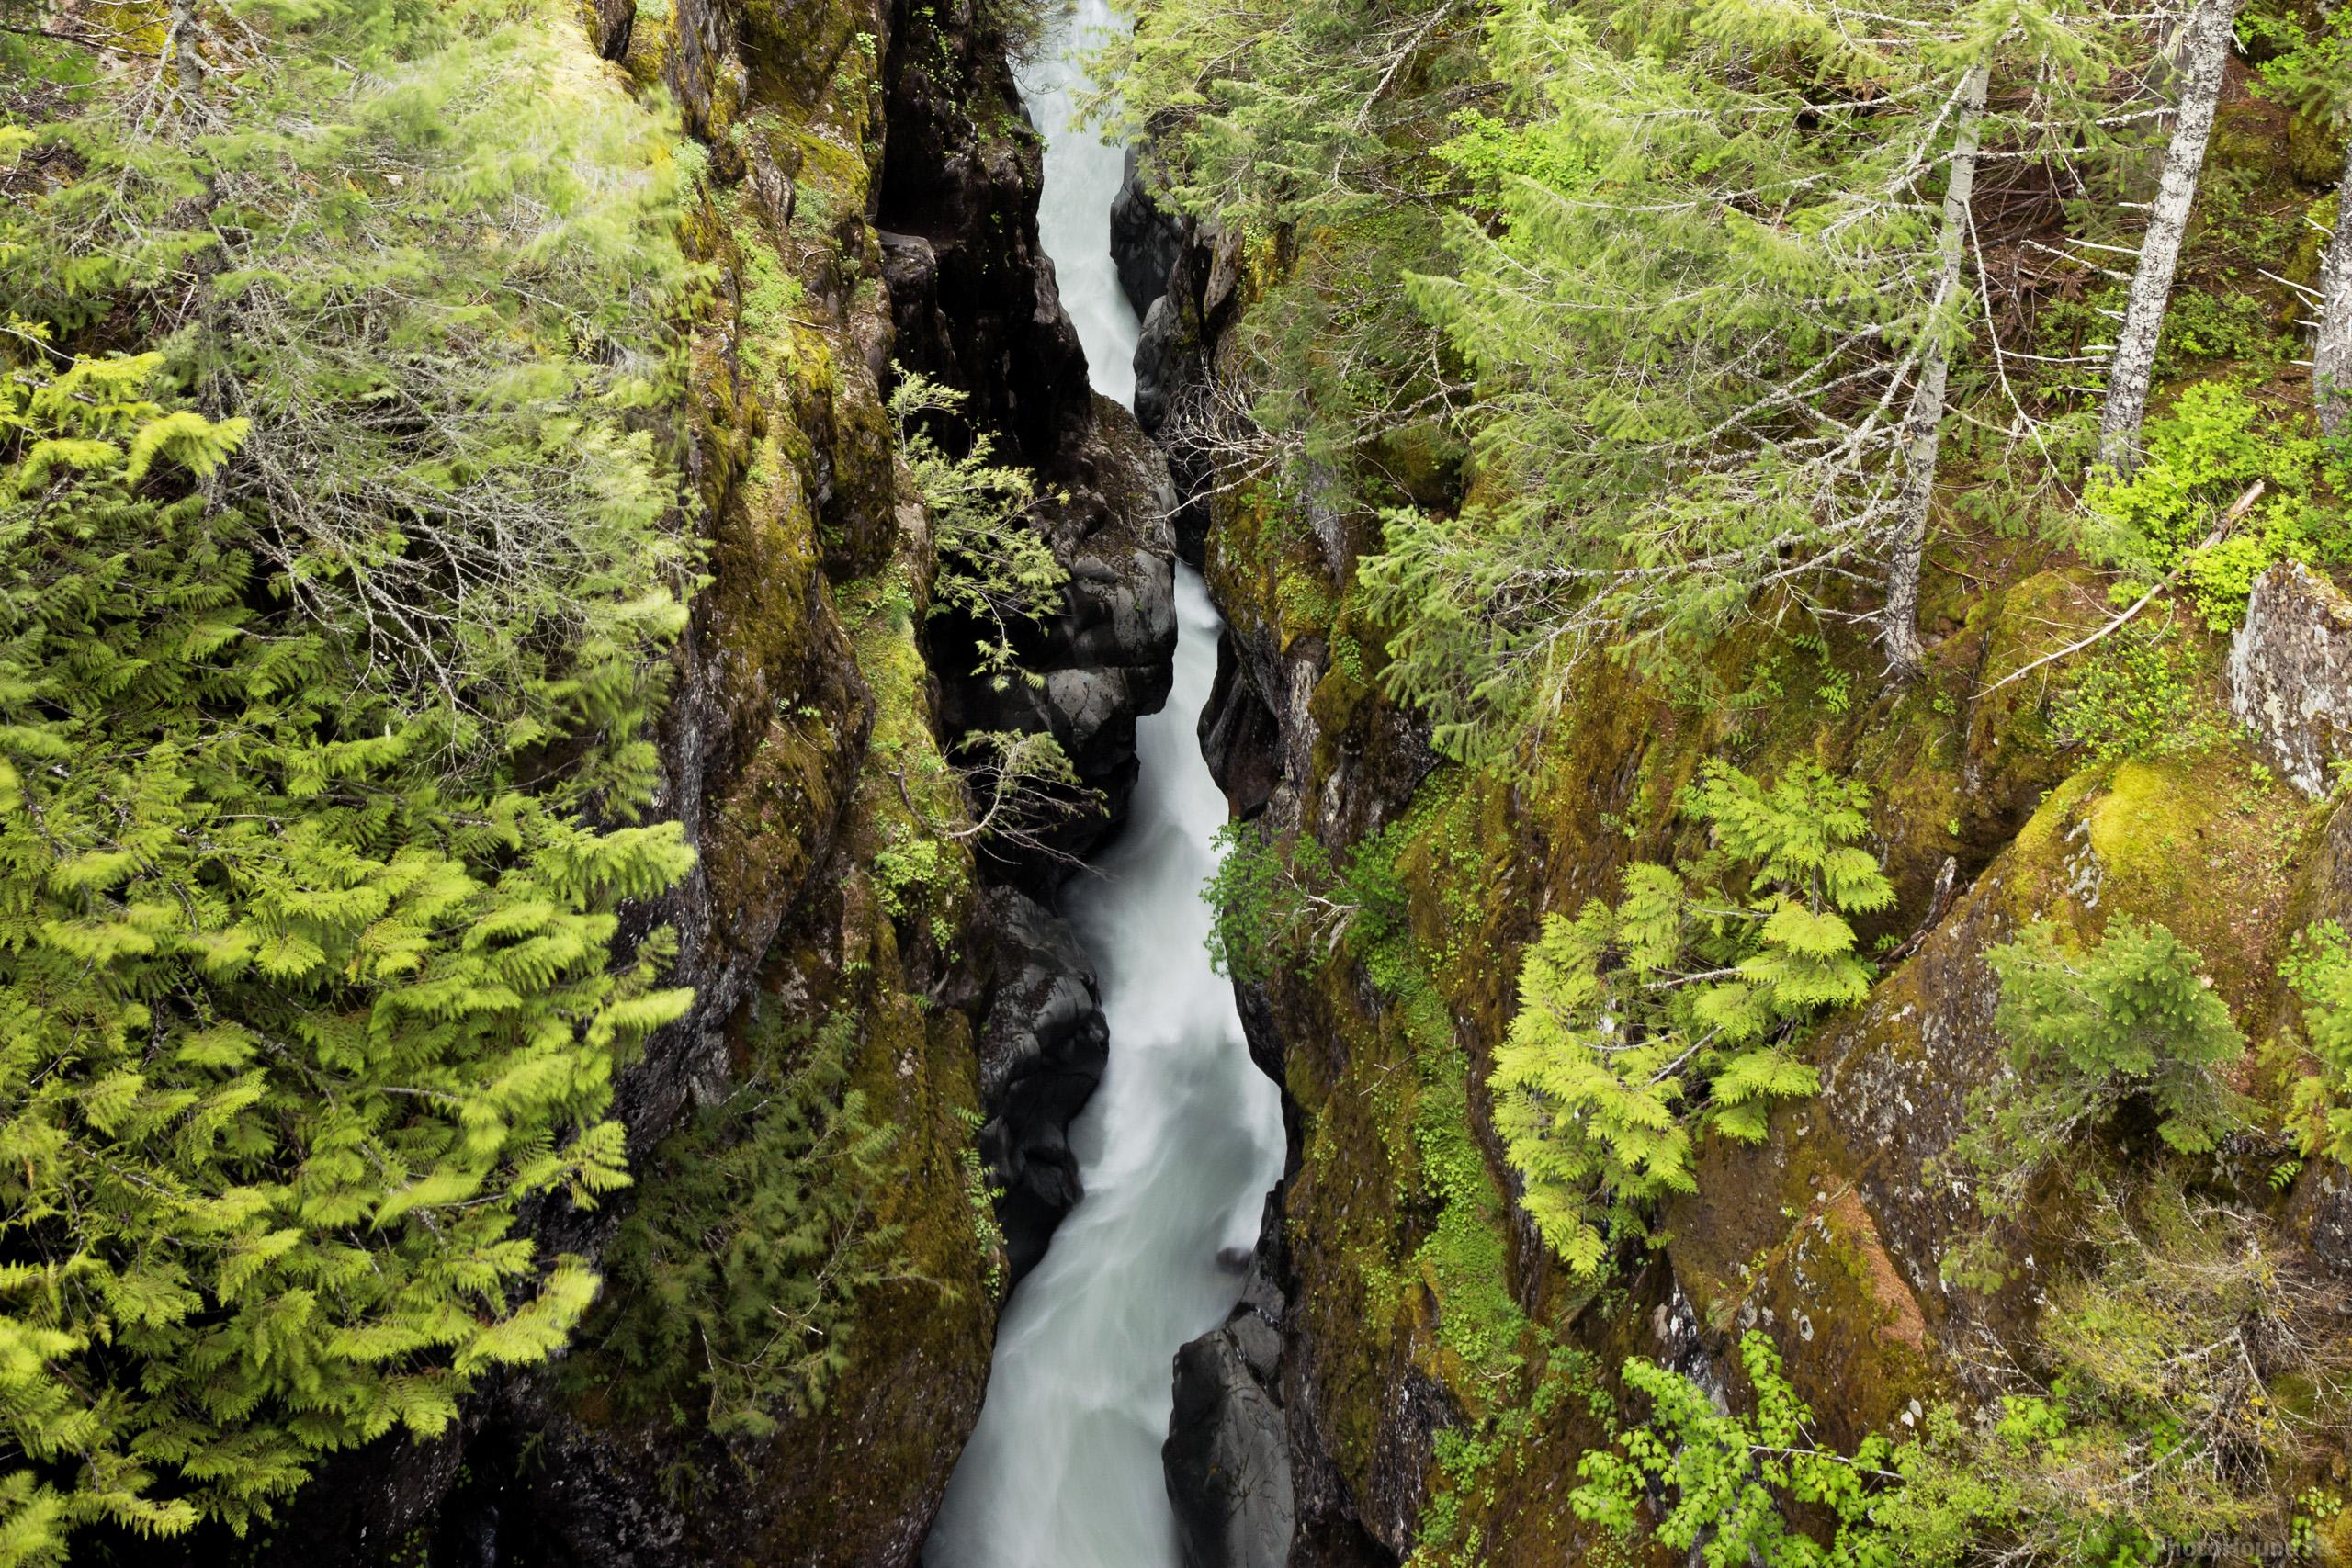 Image of Box Canyon, Mount Rainier National Park by T. Kirkendall and V. Spring